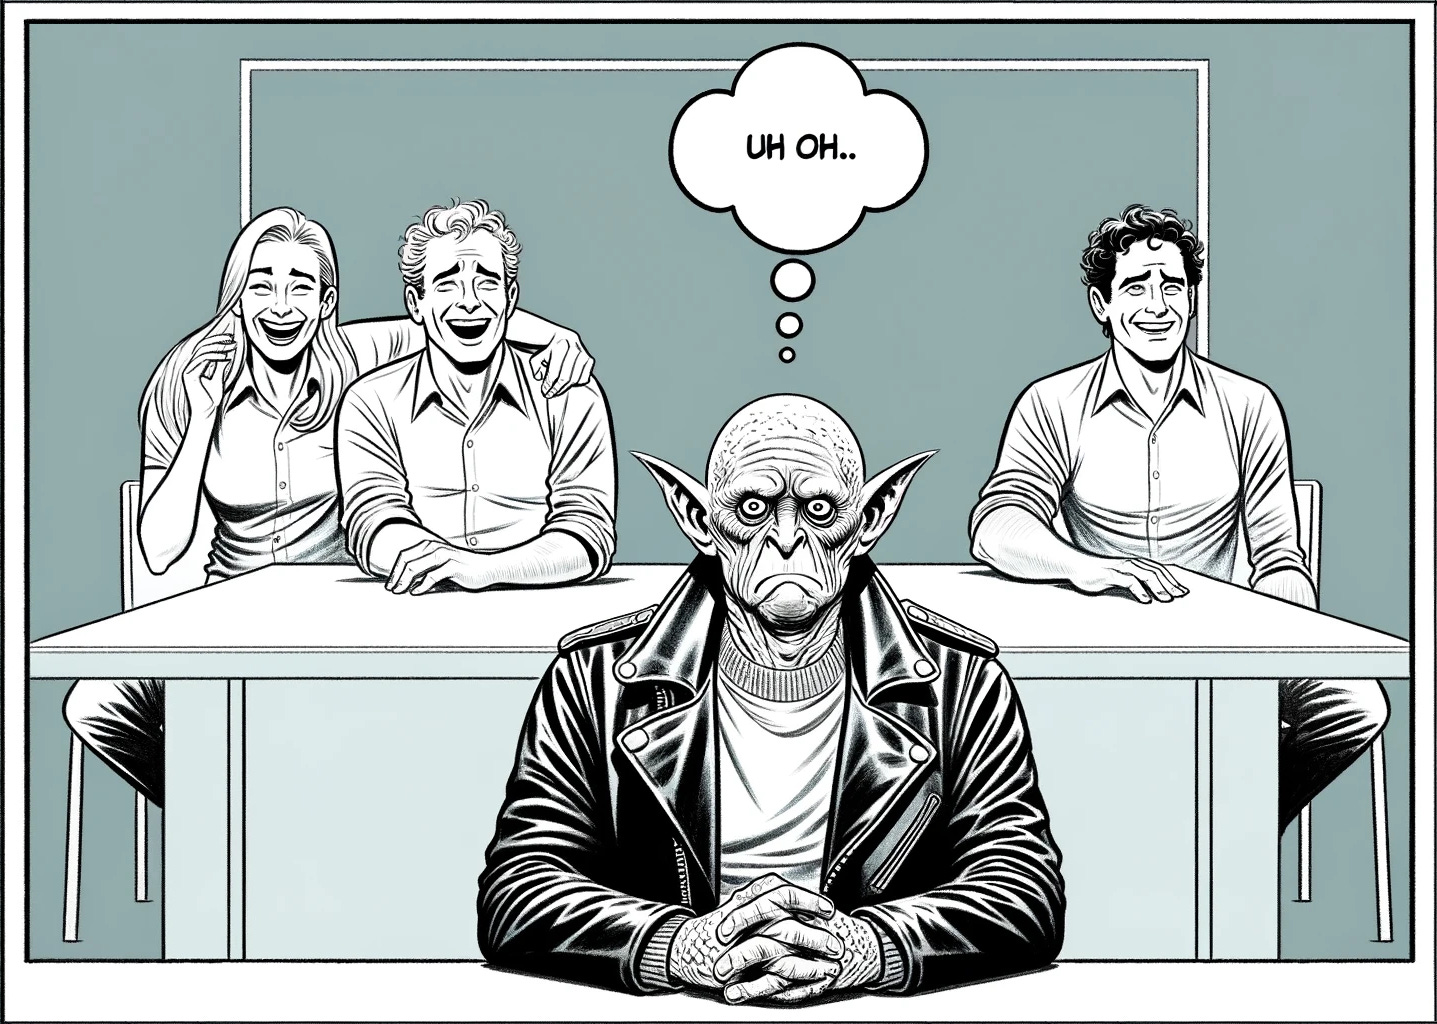 A black and white pencil-drawn comic strip panel. It features a long rectangular table where three individuals, two men and a woman, are seated on the left side, visibly laughing and enjoying themselves. Opposite them, on the right side of the table, sits a character named "Reality," who is drawn with a bald head, pointed ears, a leather jacket, and a deeply wrinkled face that conveys frustration. Above "Reality" is a thought bubble with the words "UH OH..," indicating his concern about the collaborative spirit of the team across from him. The room is simply furnished with a plain backdrop, emphasizing the characters and their interaction.